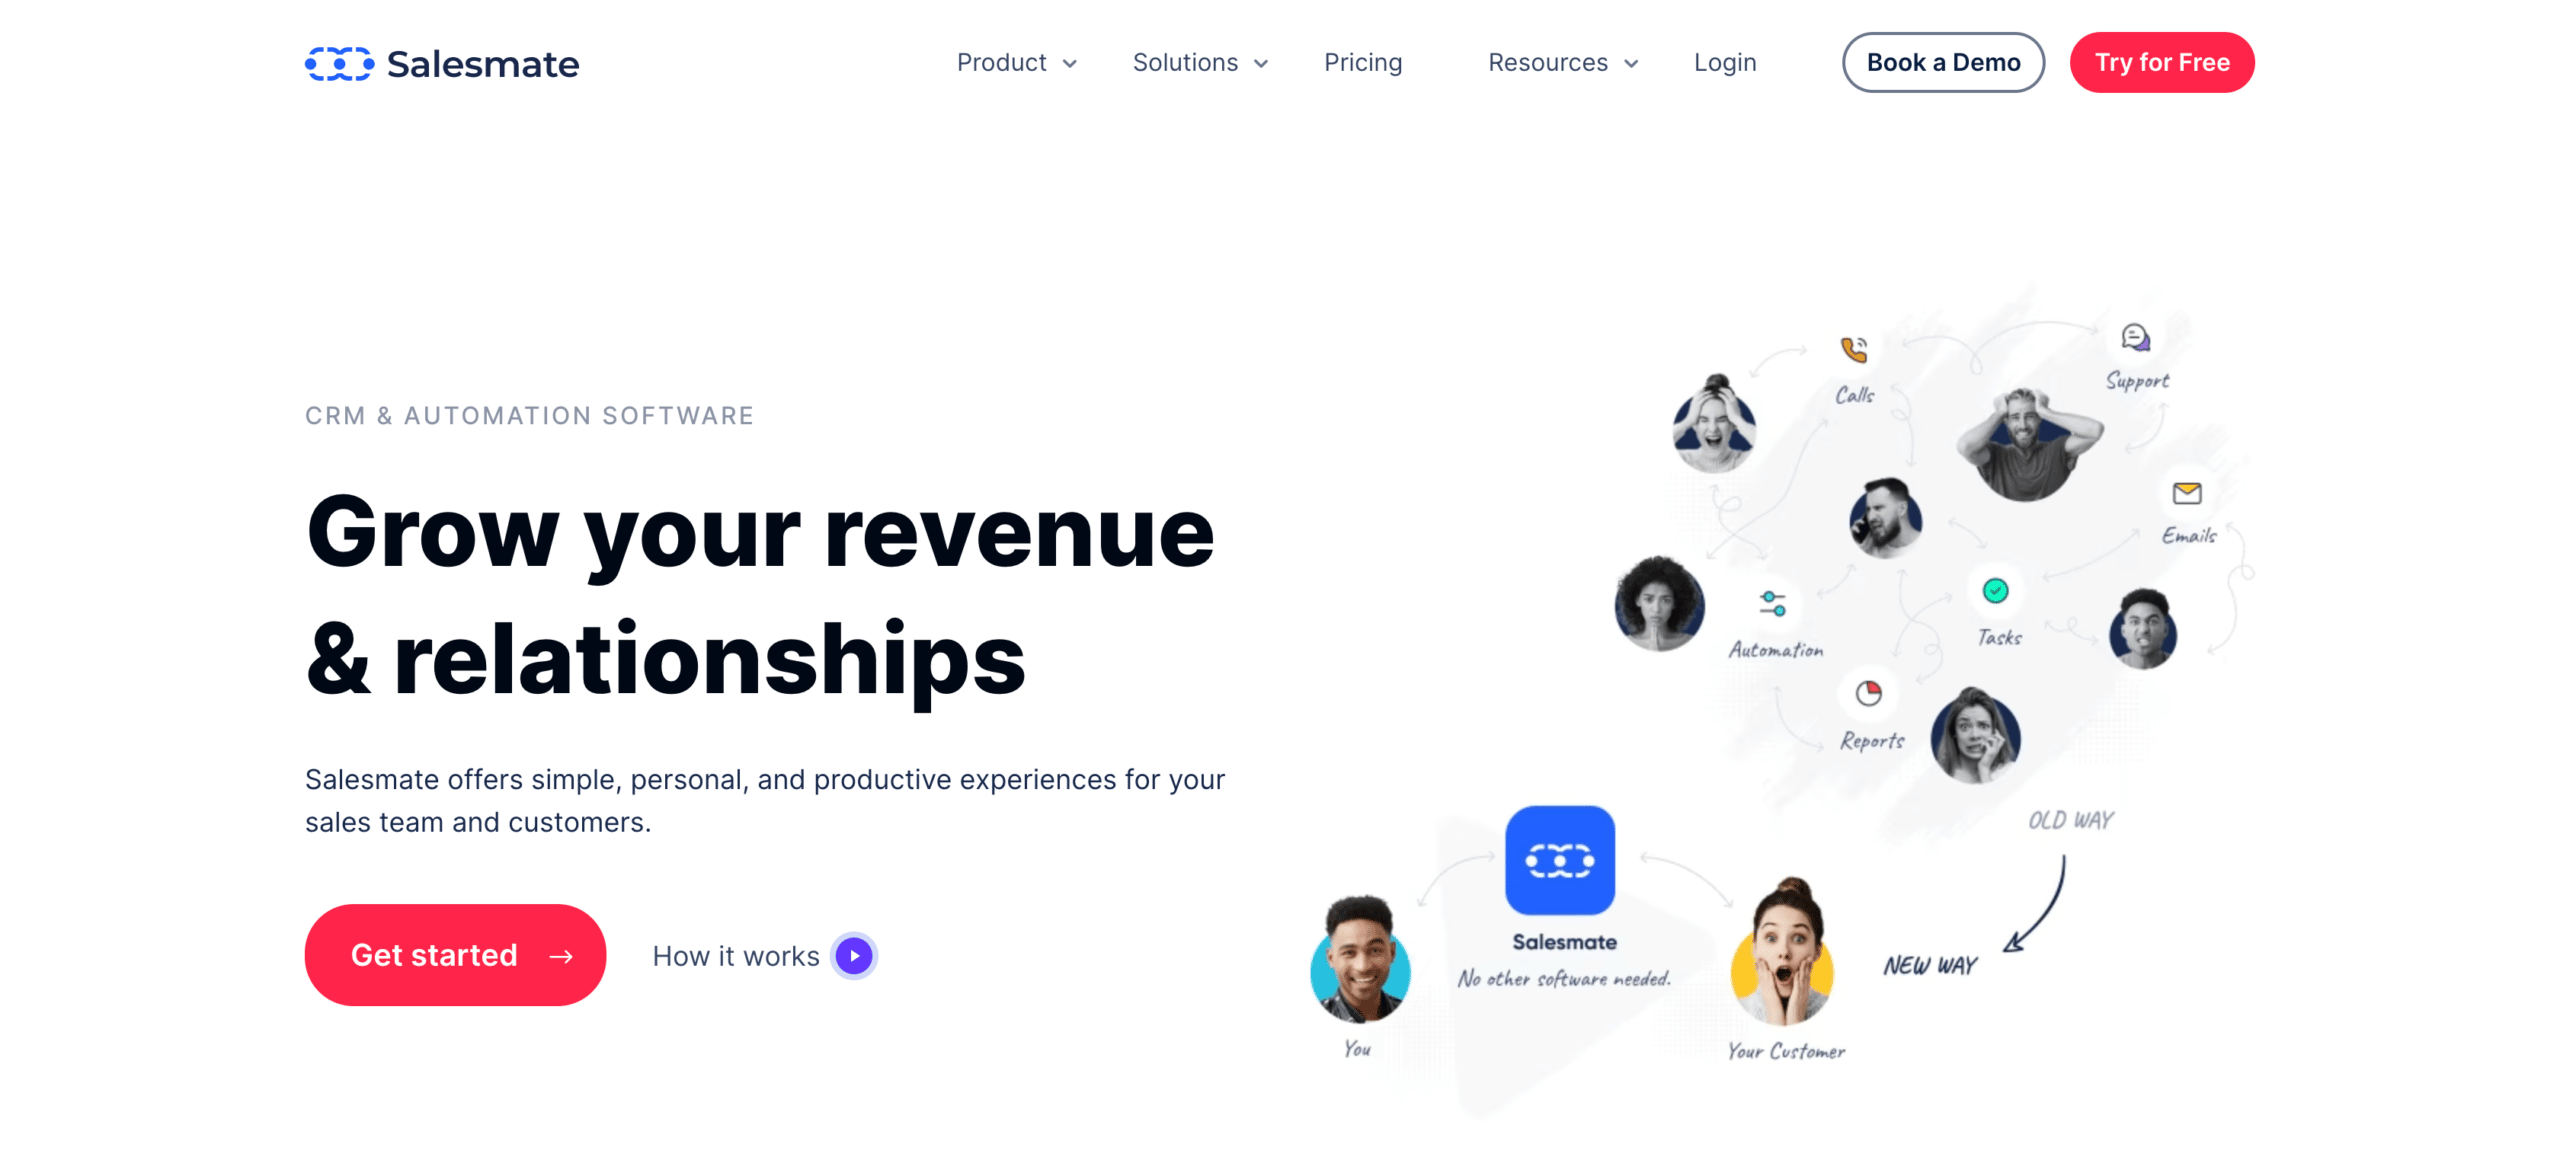 Salesmate: a SaaS sales tools to help build relationships (and revenue)